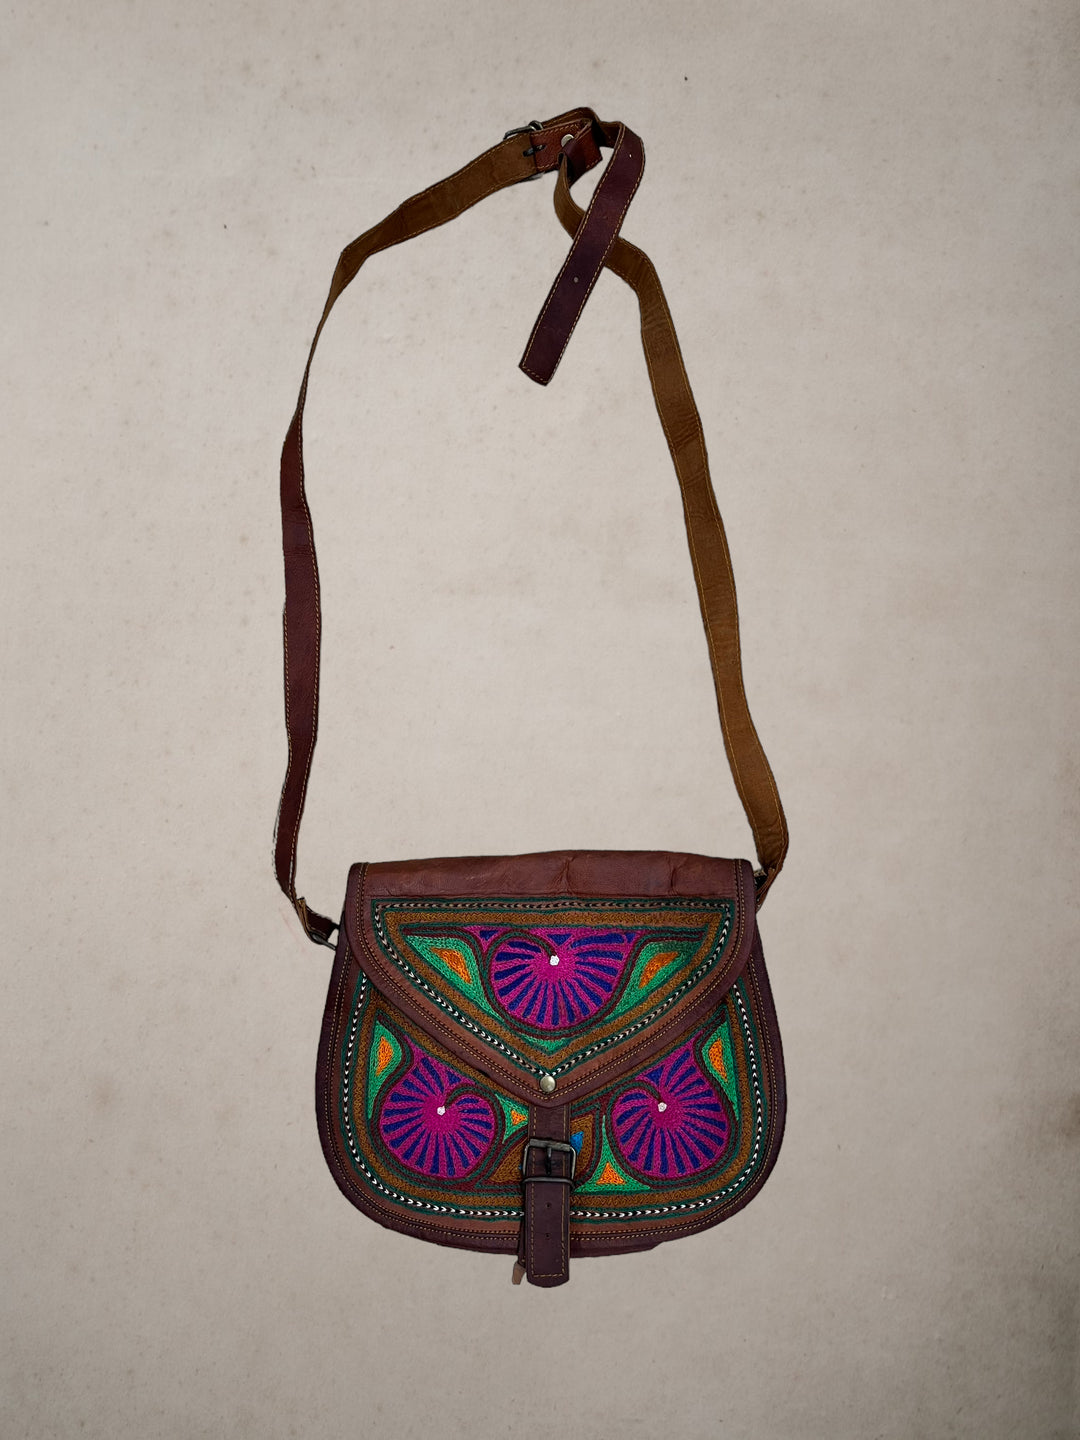 Vintage Leather Embroidered Cross Body Bag